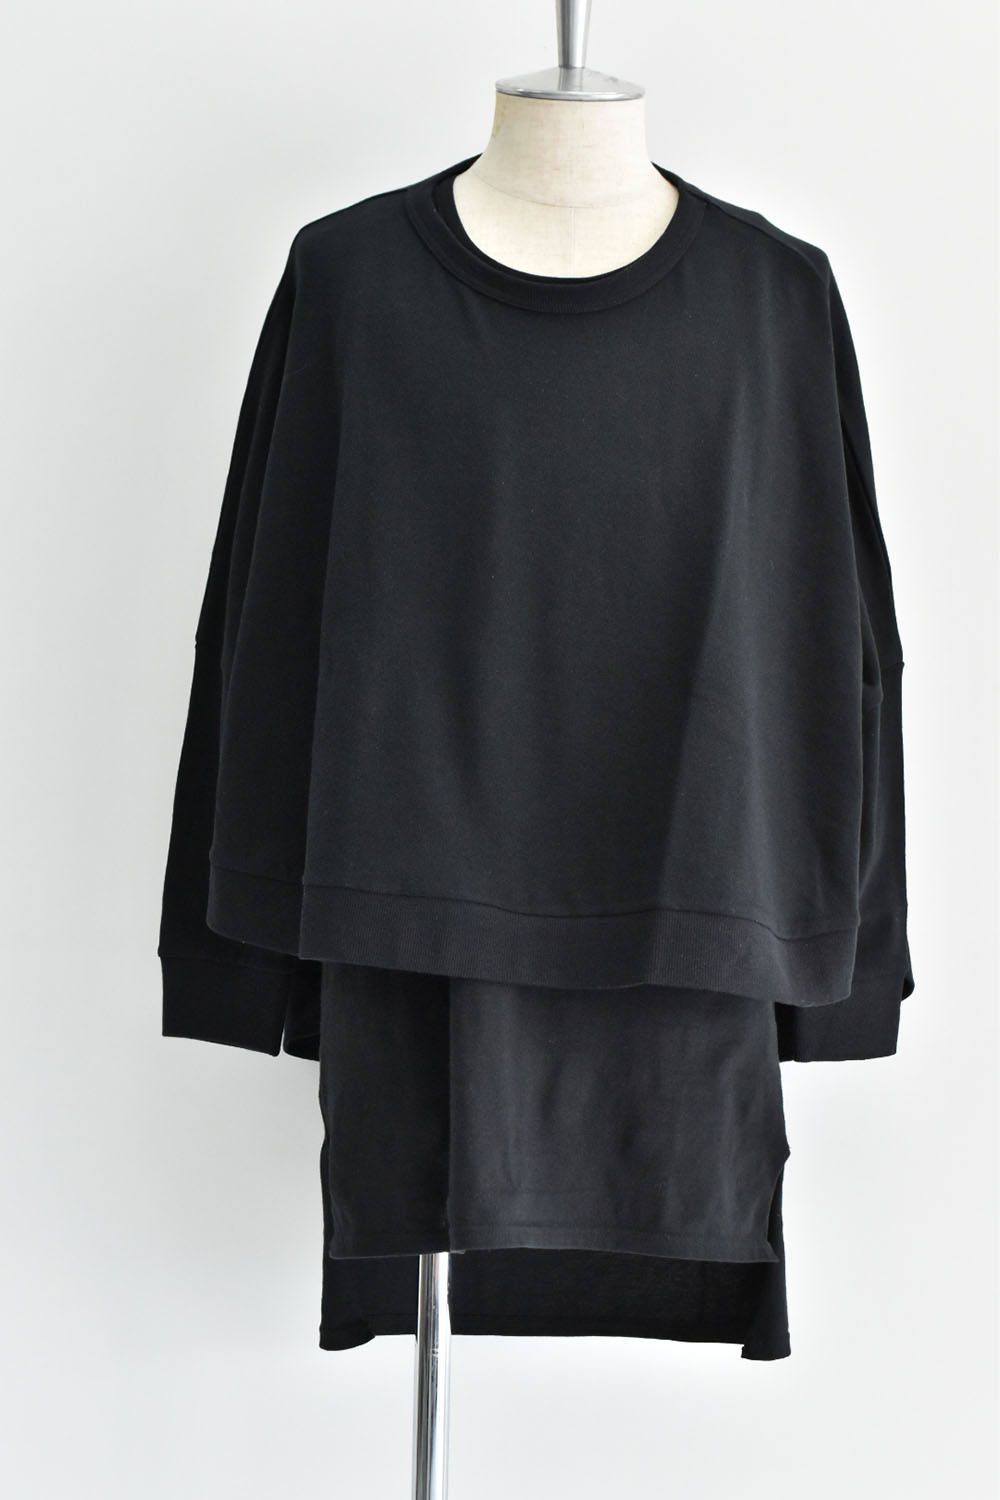 Wide pullover"Black"/レディースアイテム